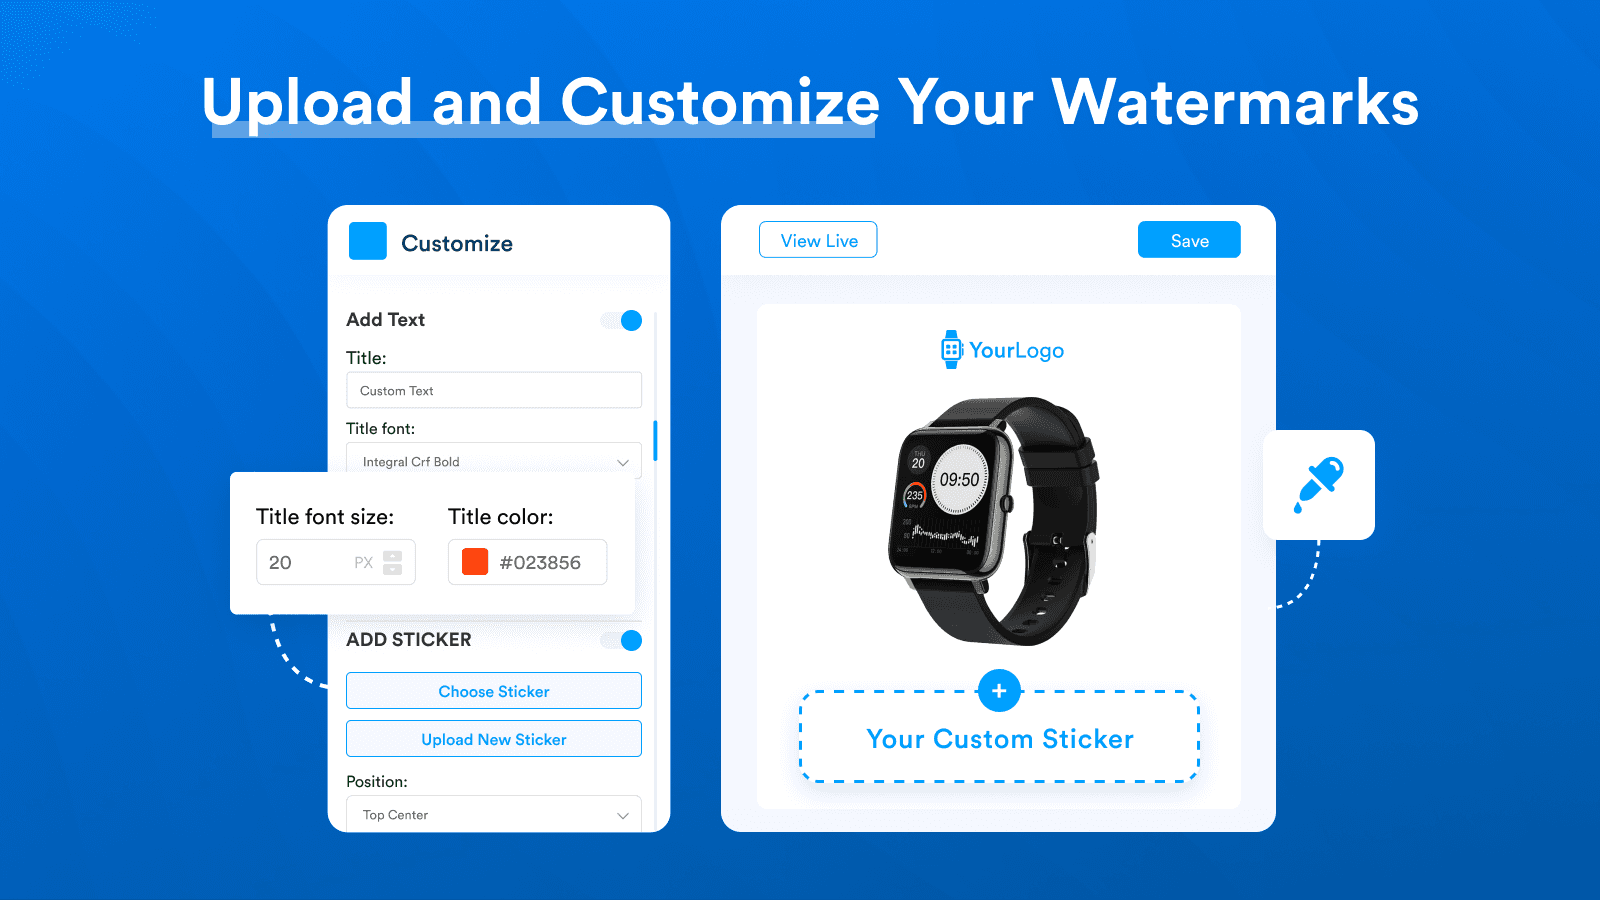 Upload and customize your watermarks